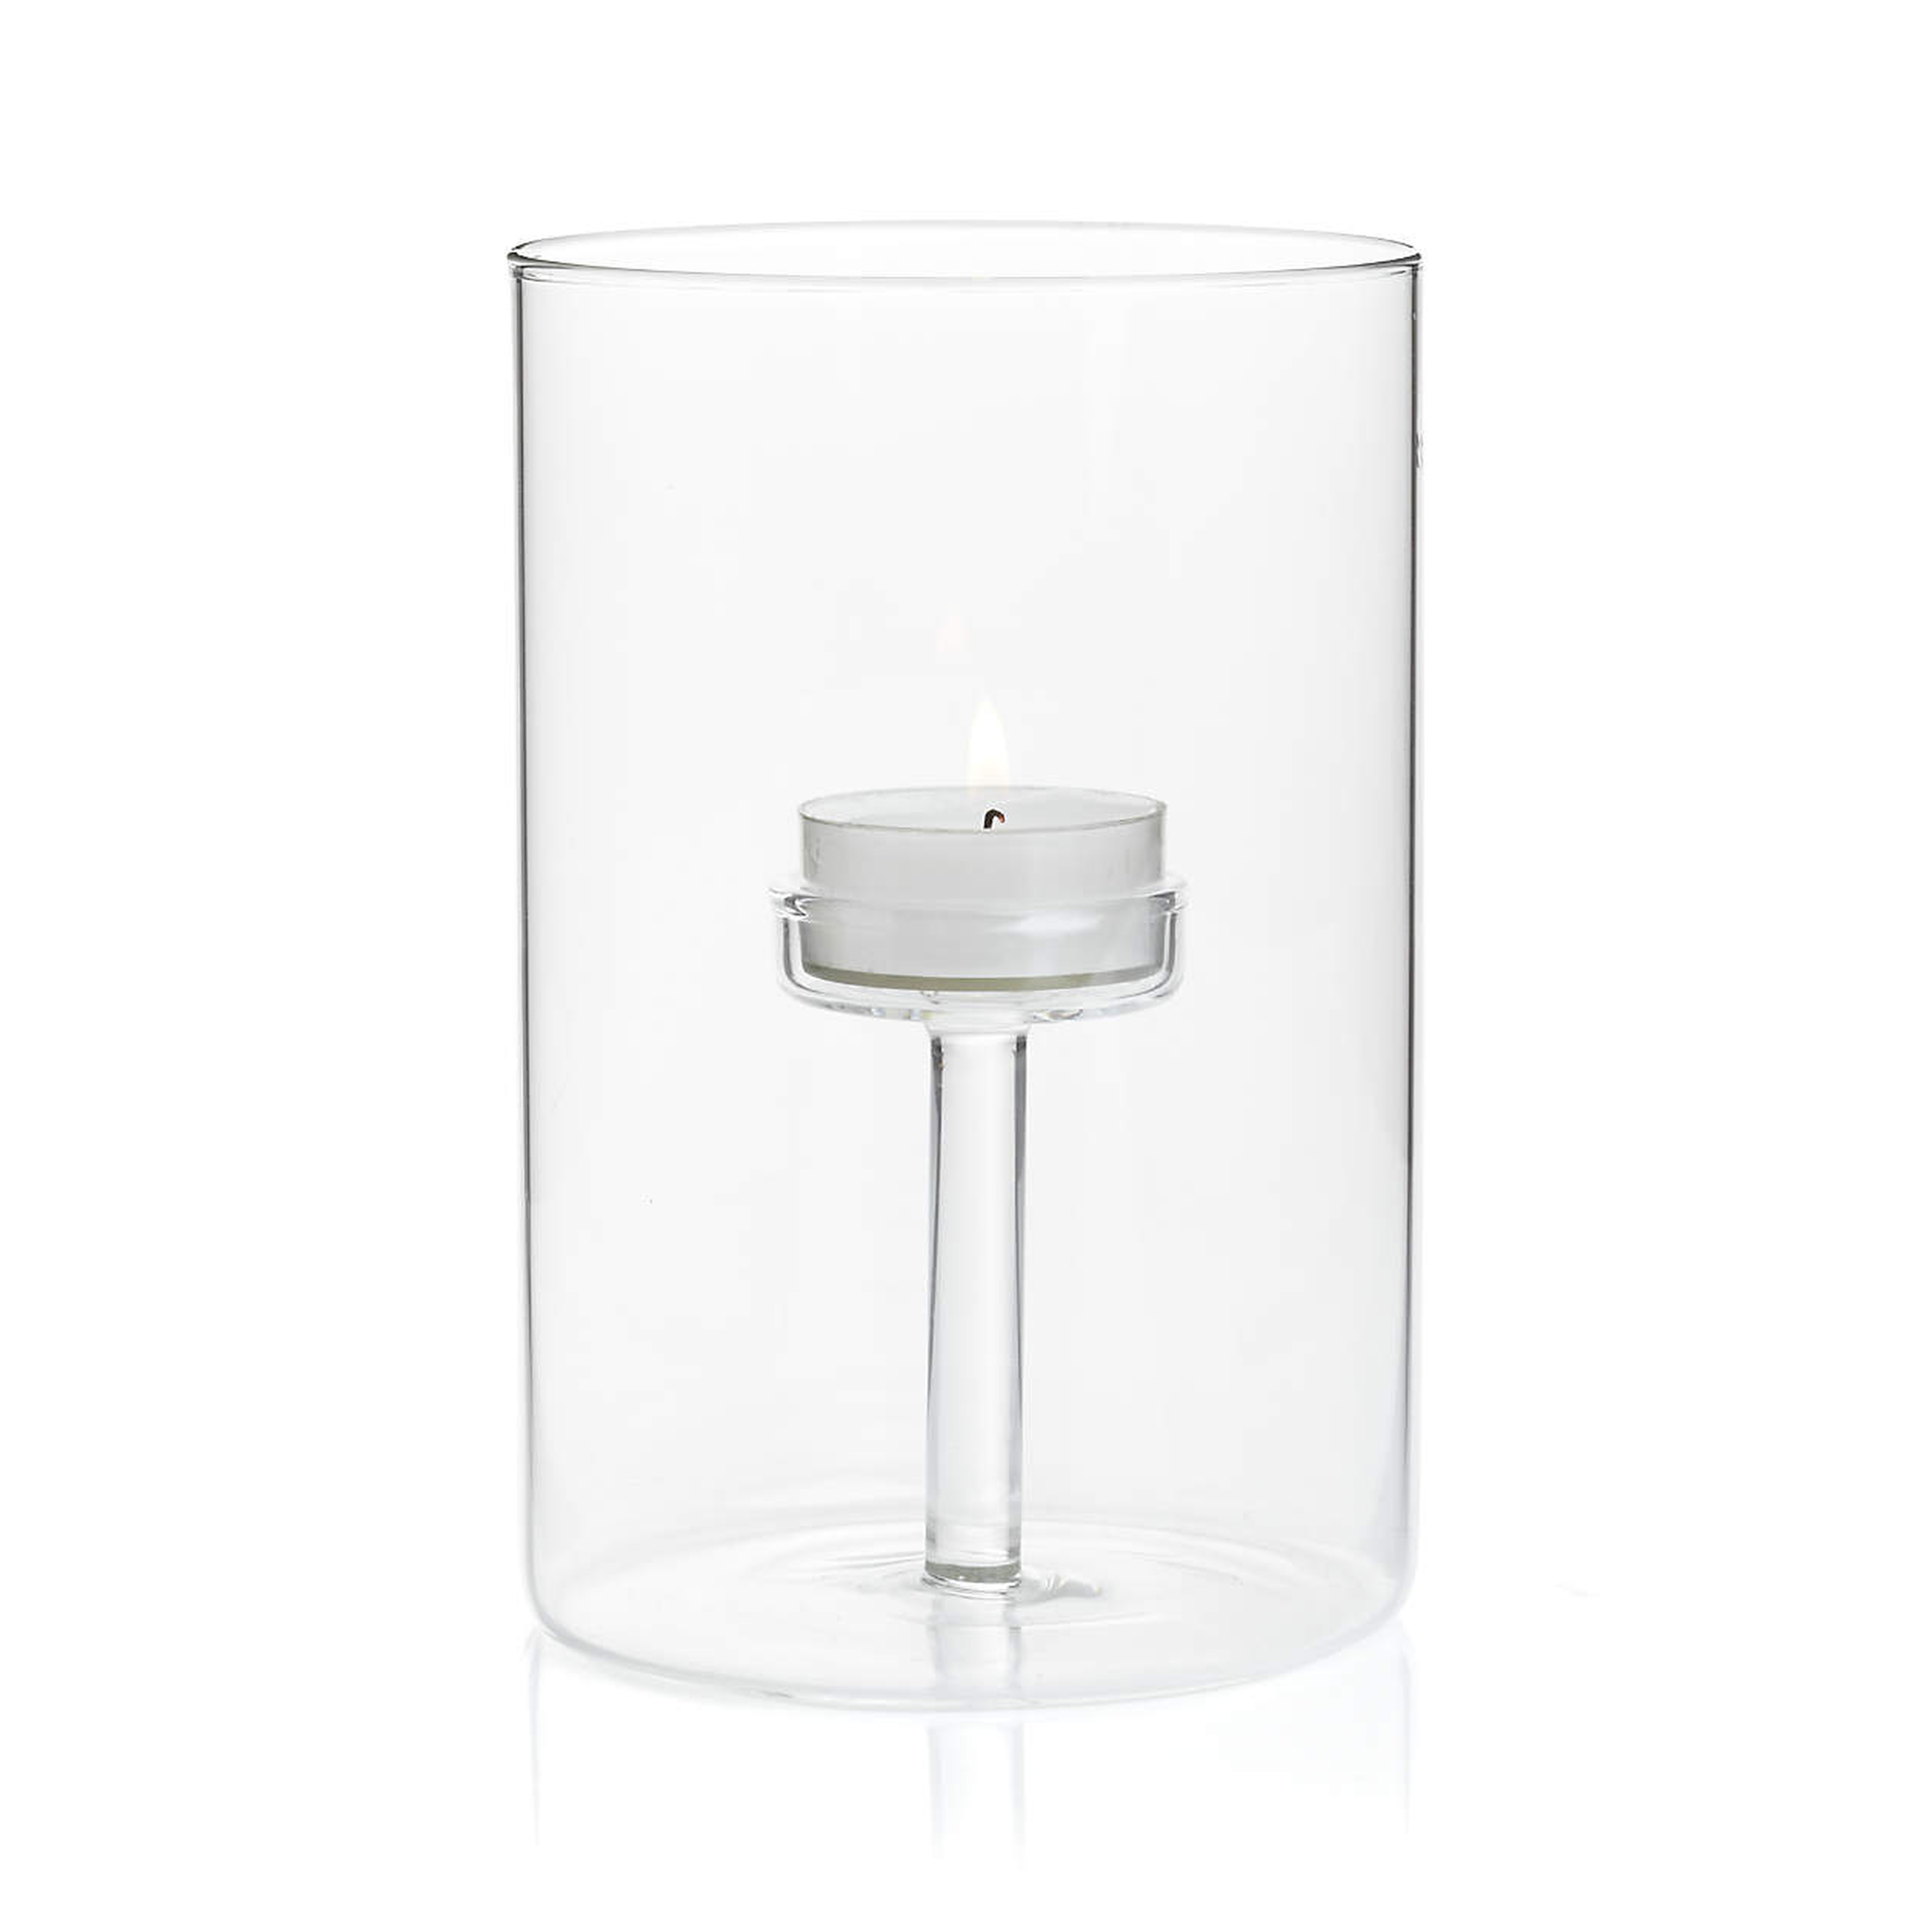 Elsa Large Glass Tealight Candle Holder - Crate and Barrel